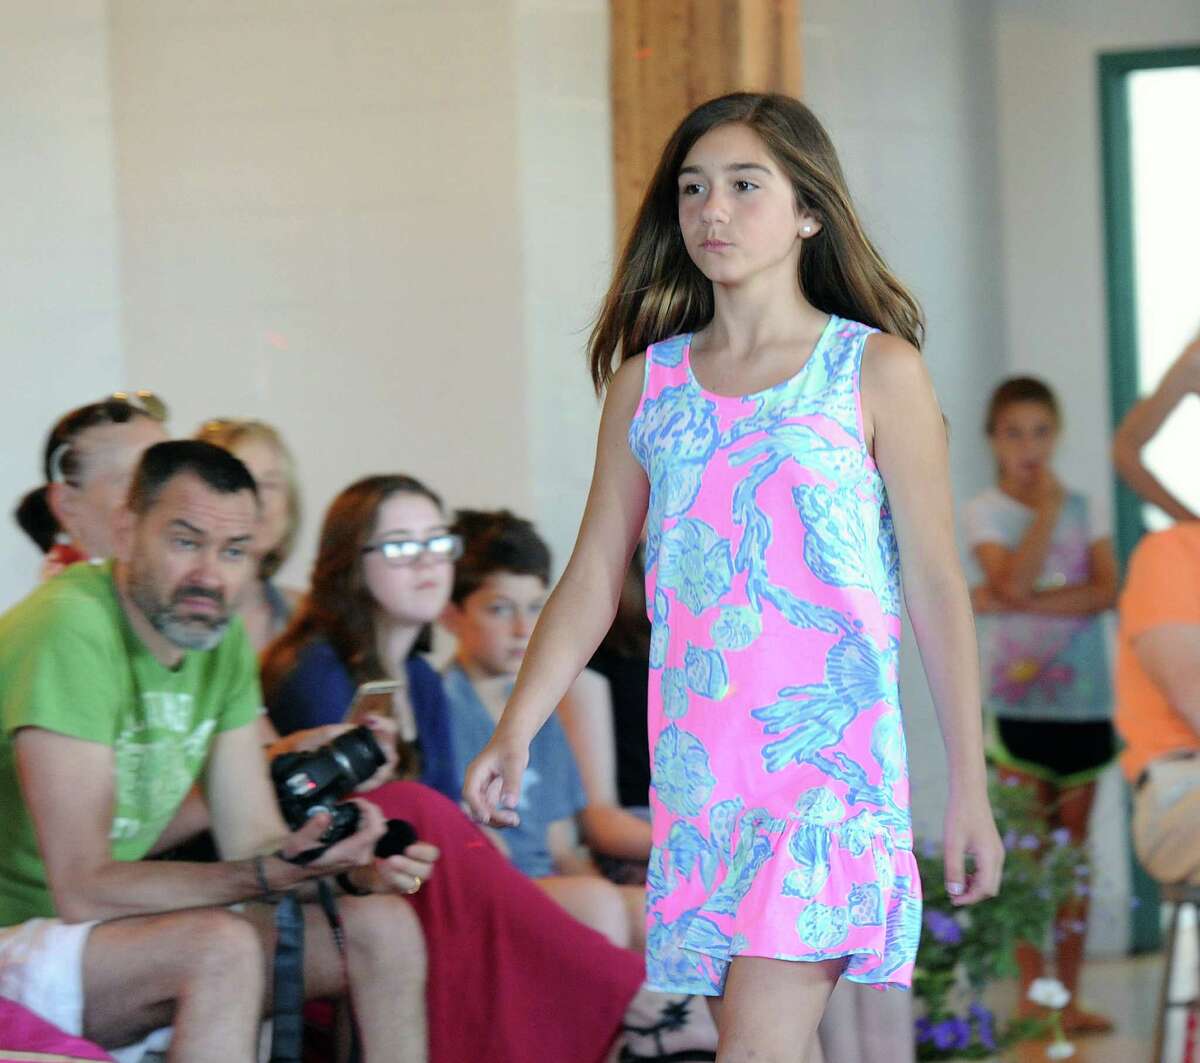 Central Middle School 6th grader Christina Andruss, 11, as a model in the EveryBodyBeautiful Fashion Show